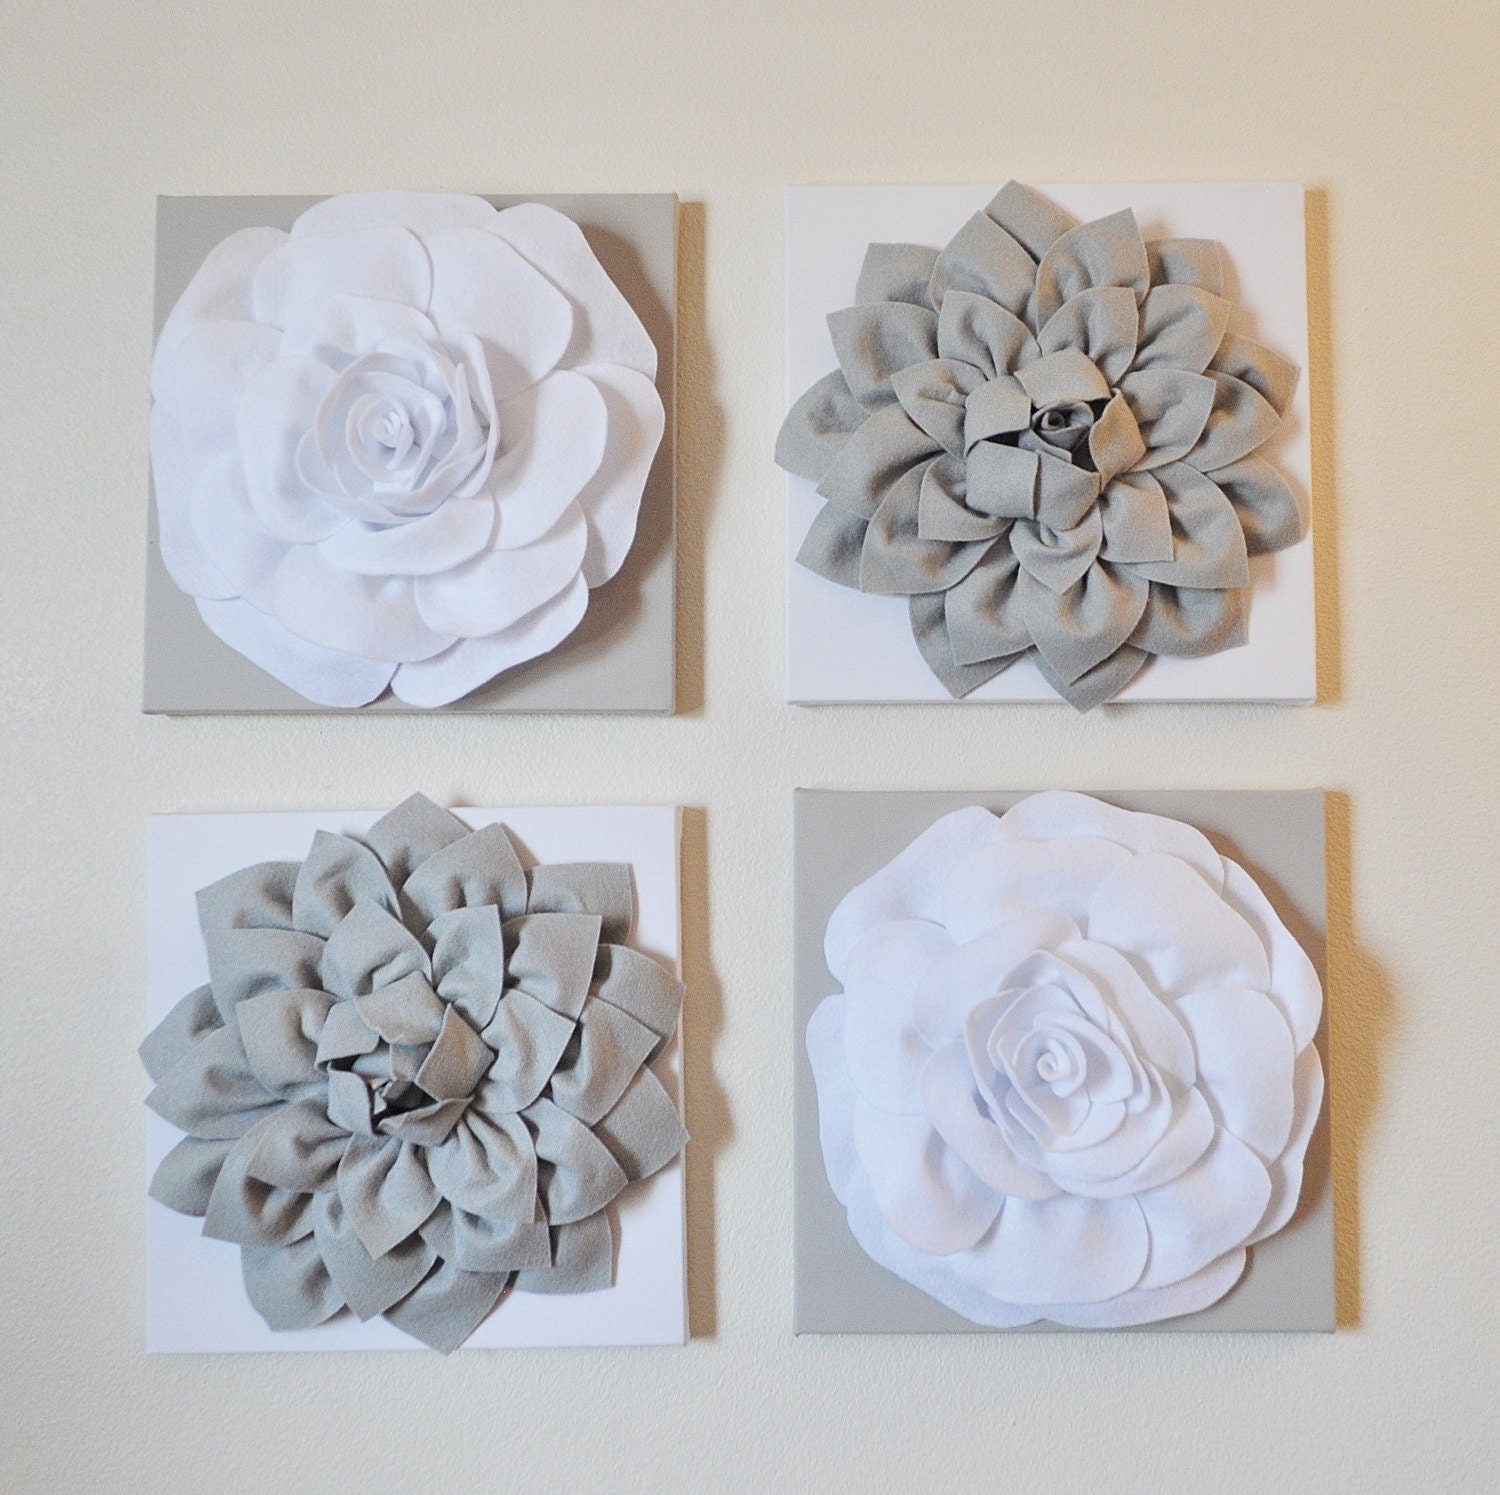  Wall  Decor  SET OF FOUR Gray and White  Flower  Wall  by bedbuggs